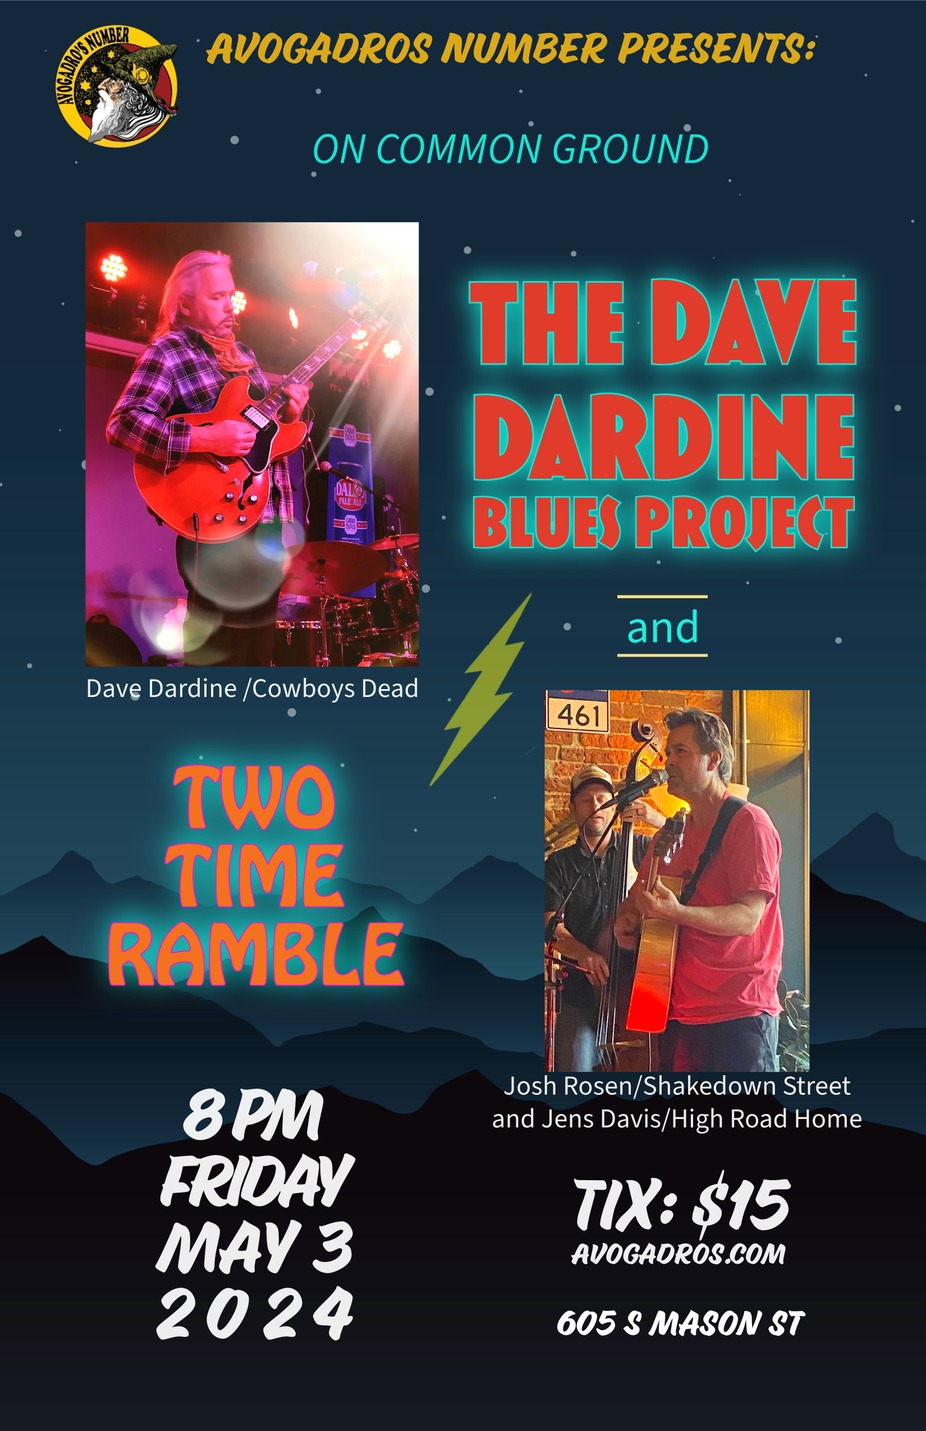 Dave Dardine Project and Two Time Ramble event photo